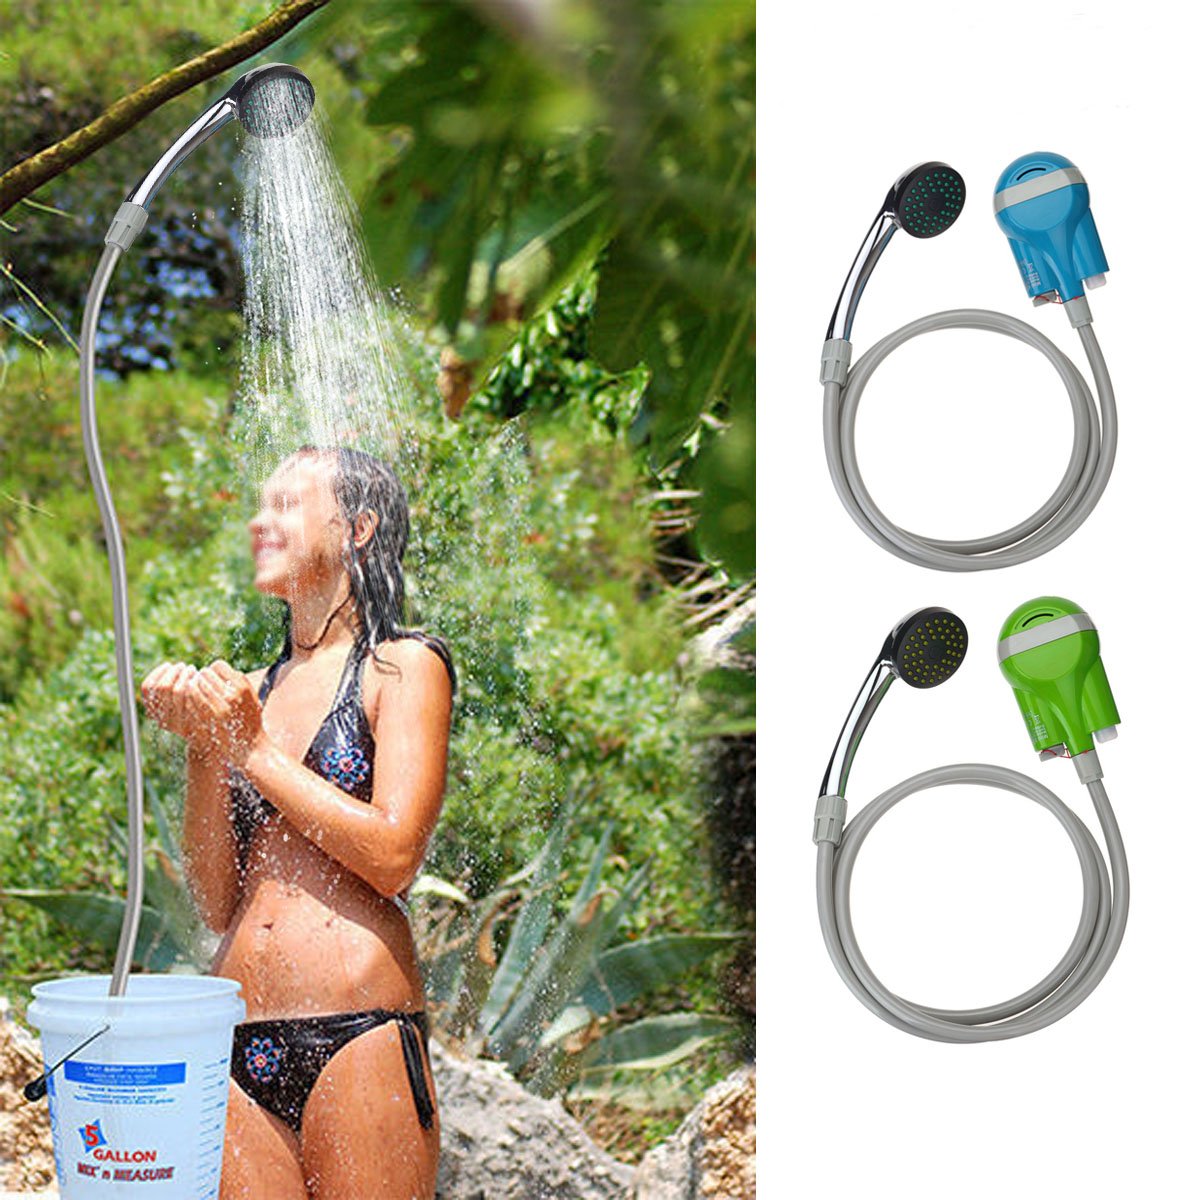 IPRee® Portable USB Shower Water Pump Rechargeable Nozzle Handheld Camp Travel Outdoor Kit 1